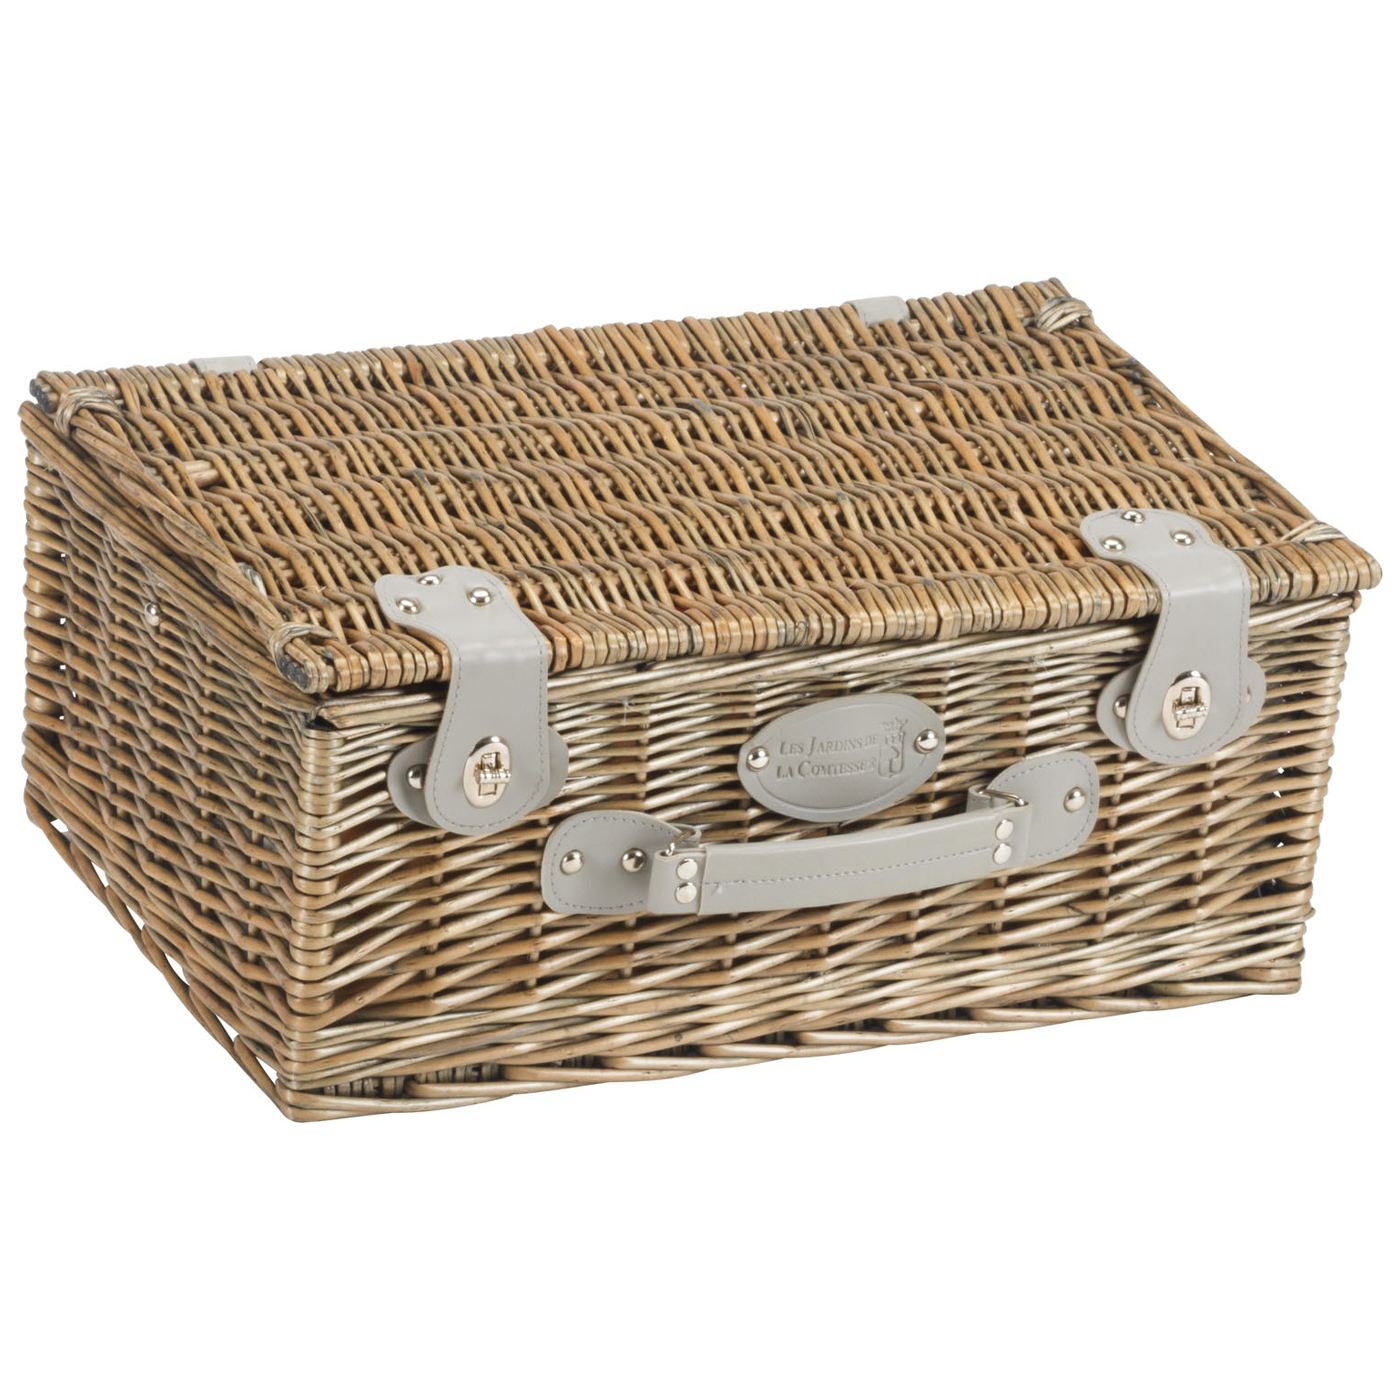 Panier picnic Marly rouge - 4 personnes